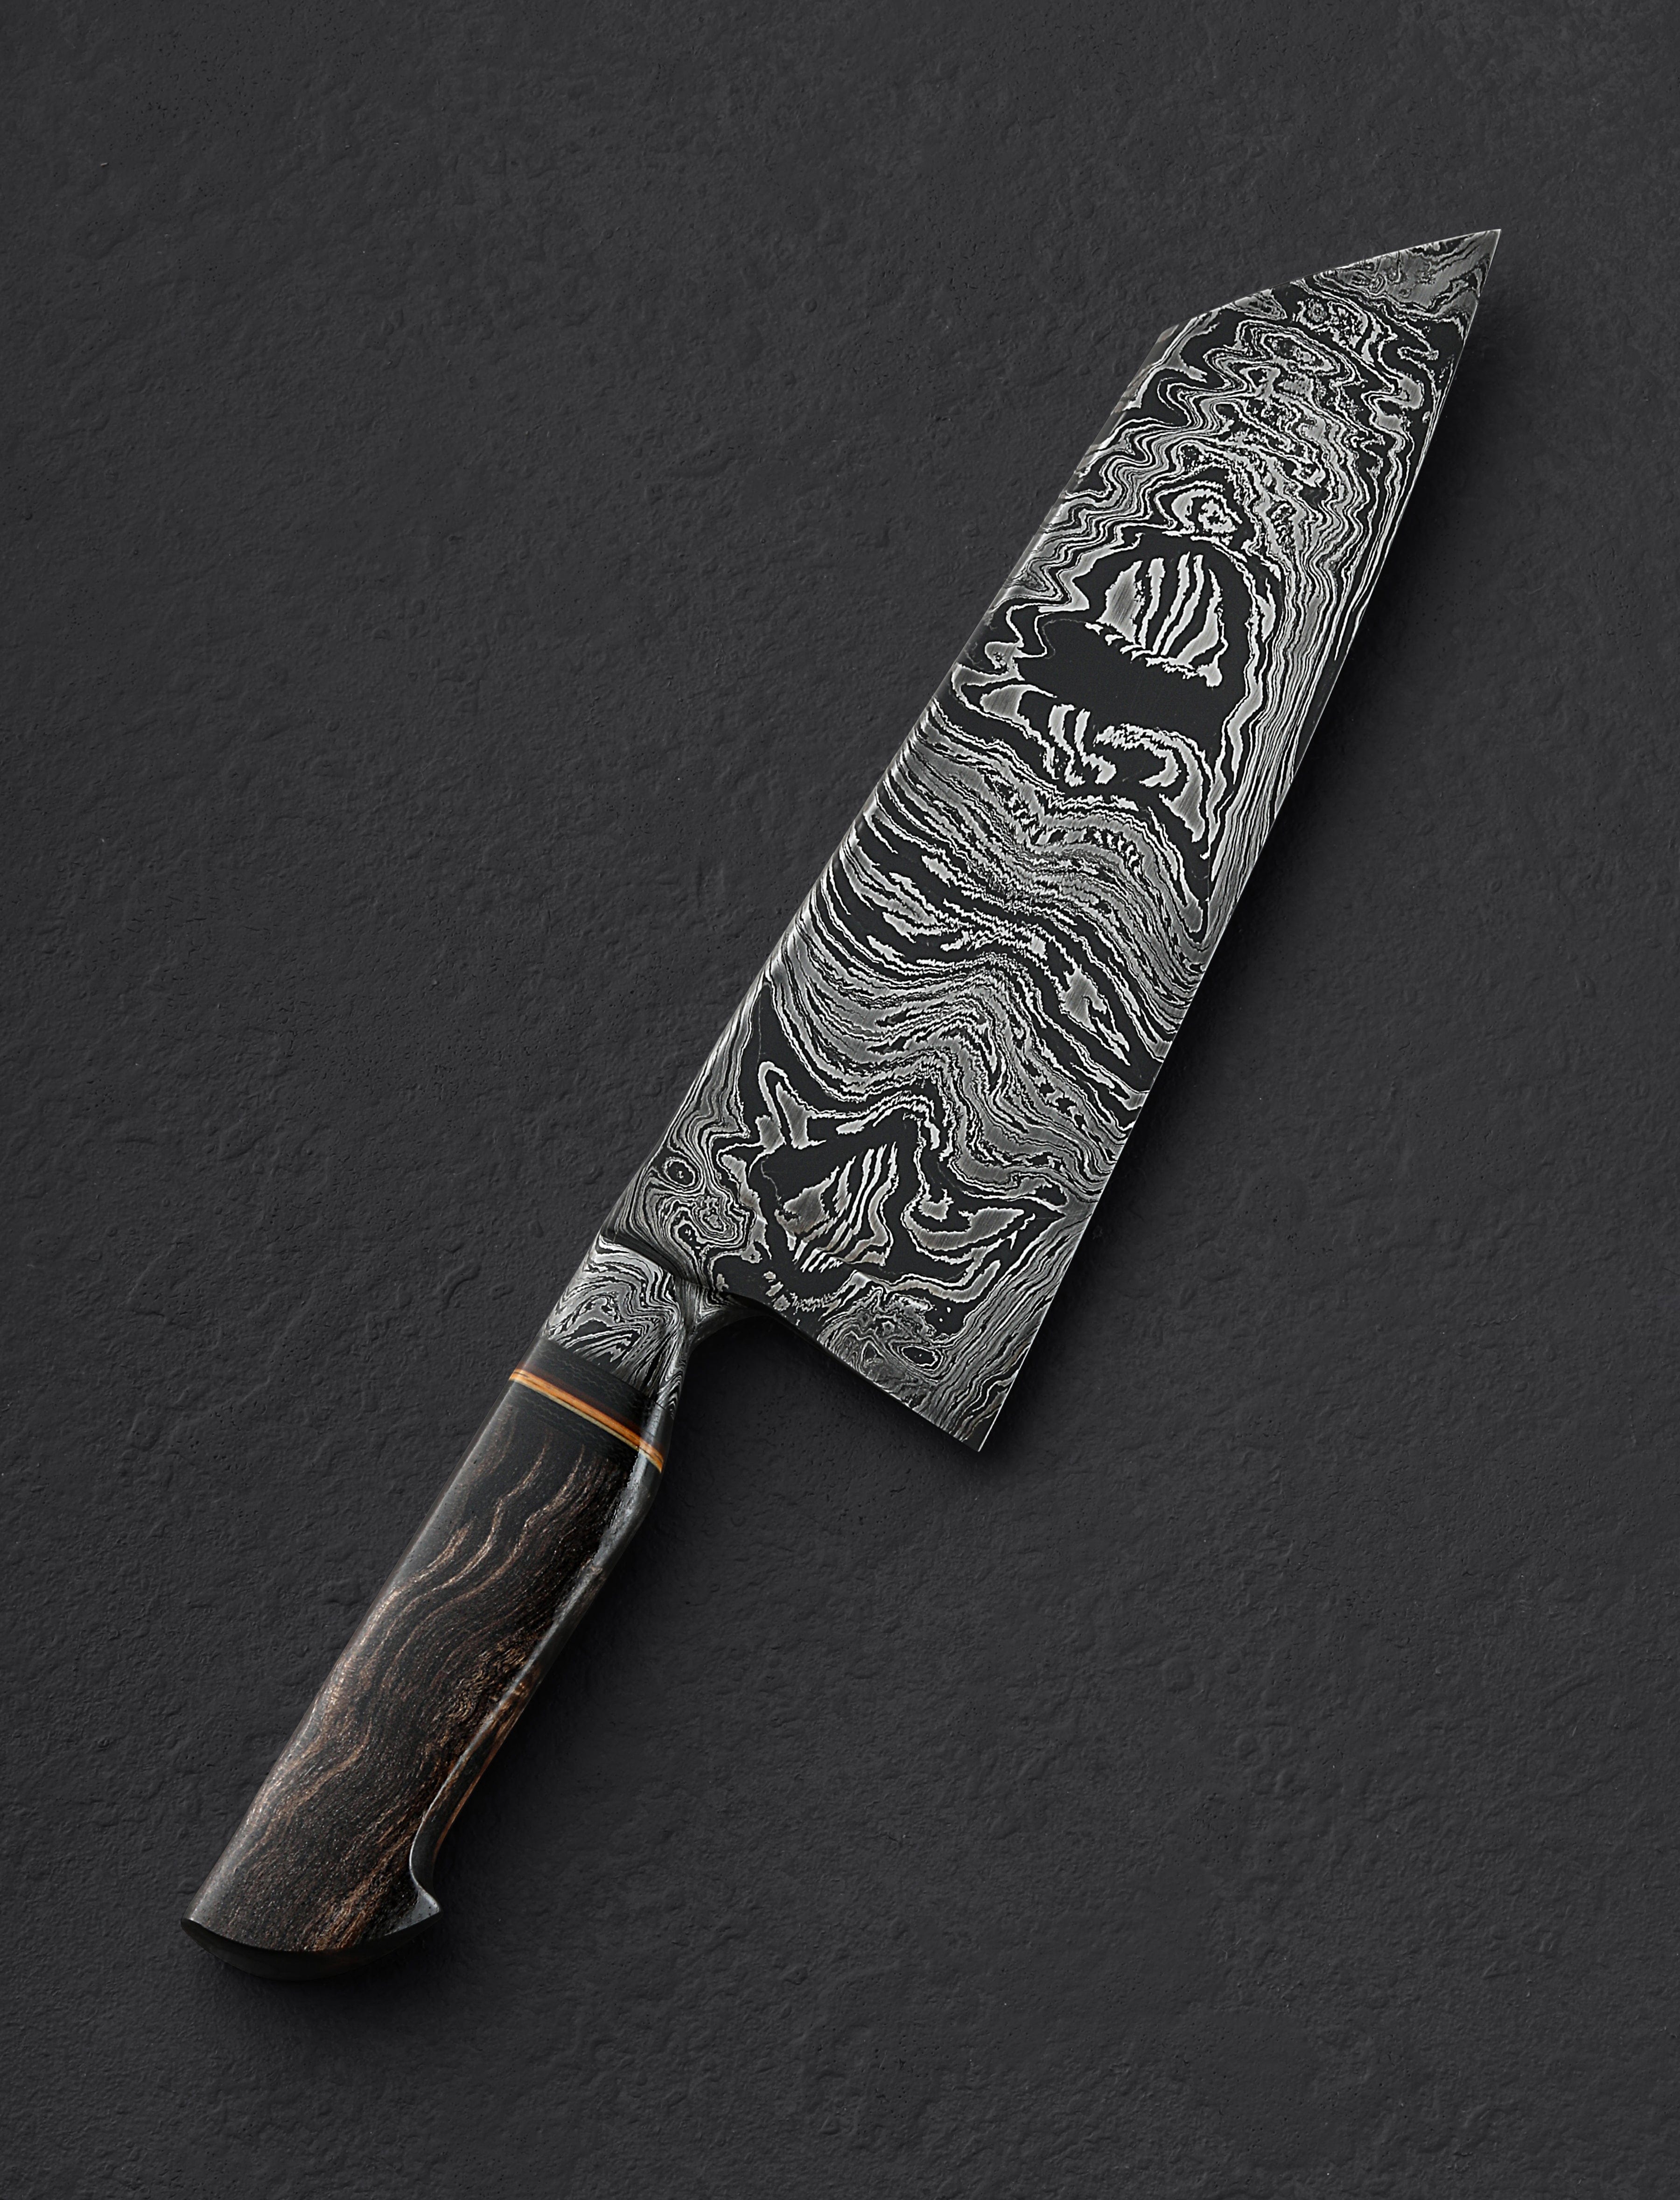 What Are Damascus Knives And Why Do Chefs Love Them? – Dalstrong